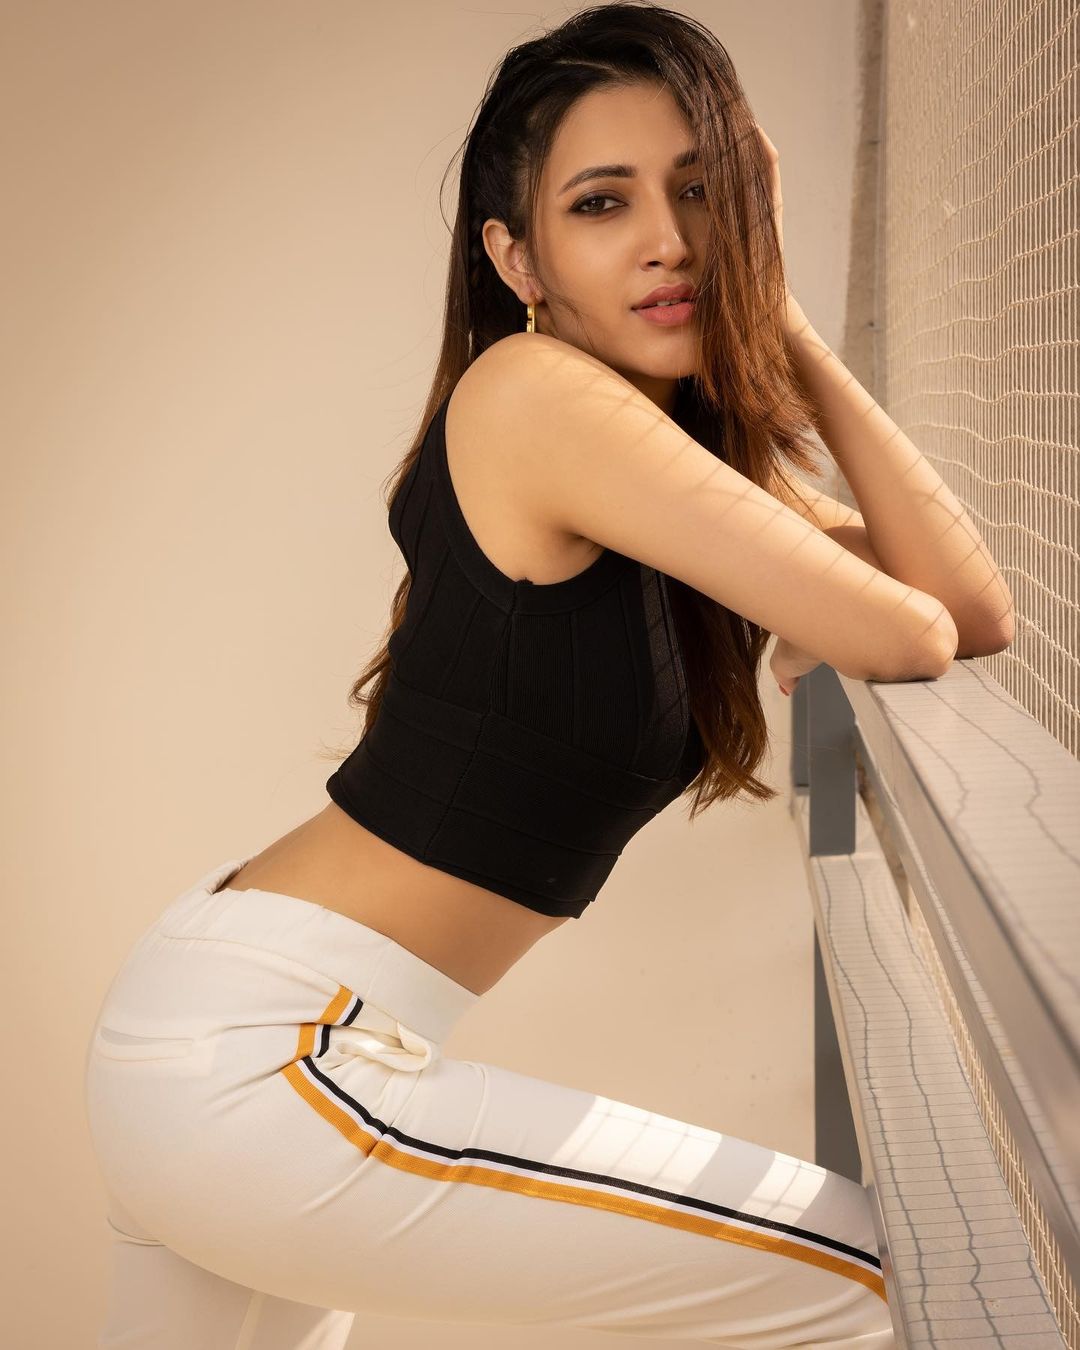 Neha Shetty flaunts her svelte figure in the crop top and joggers